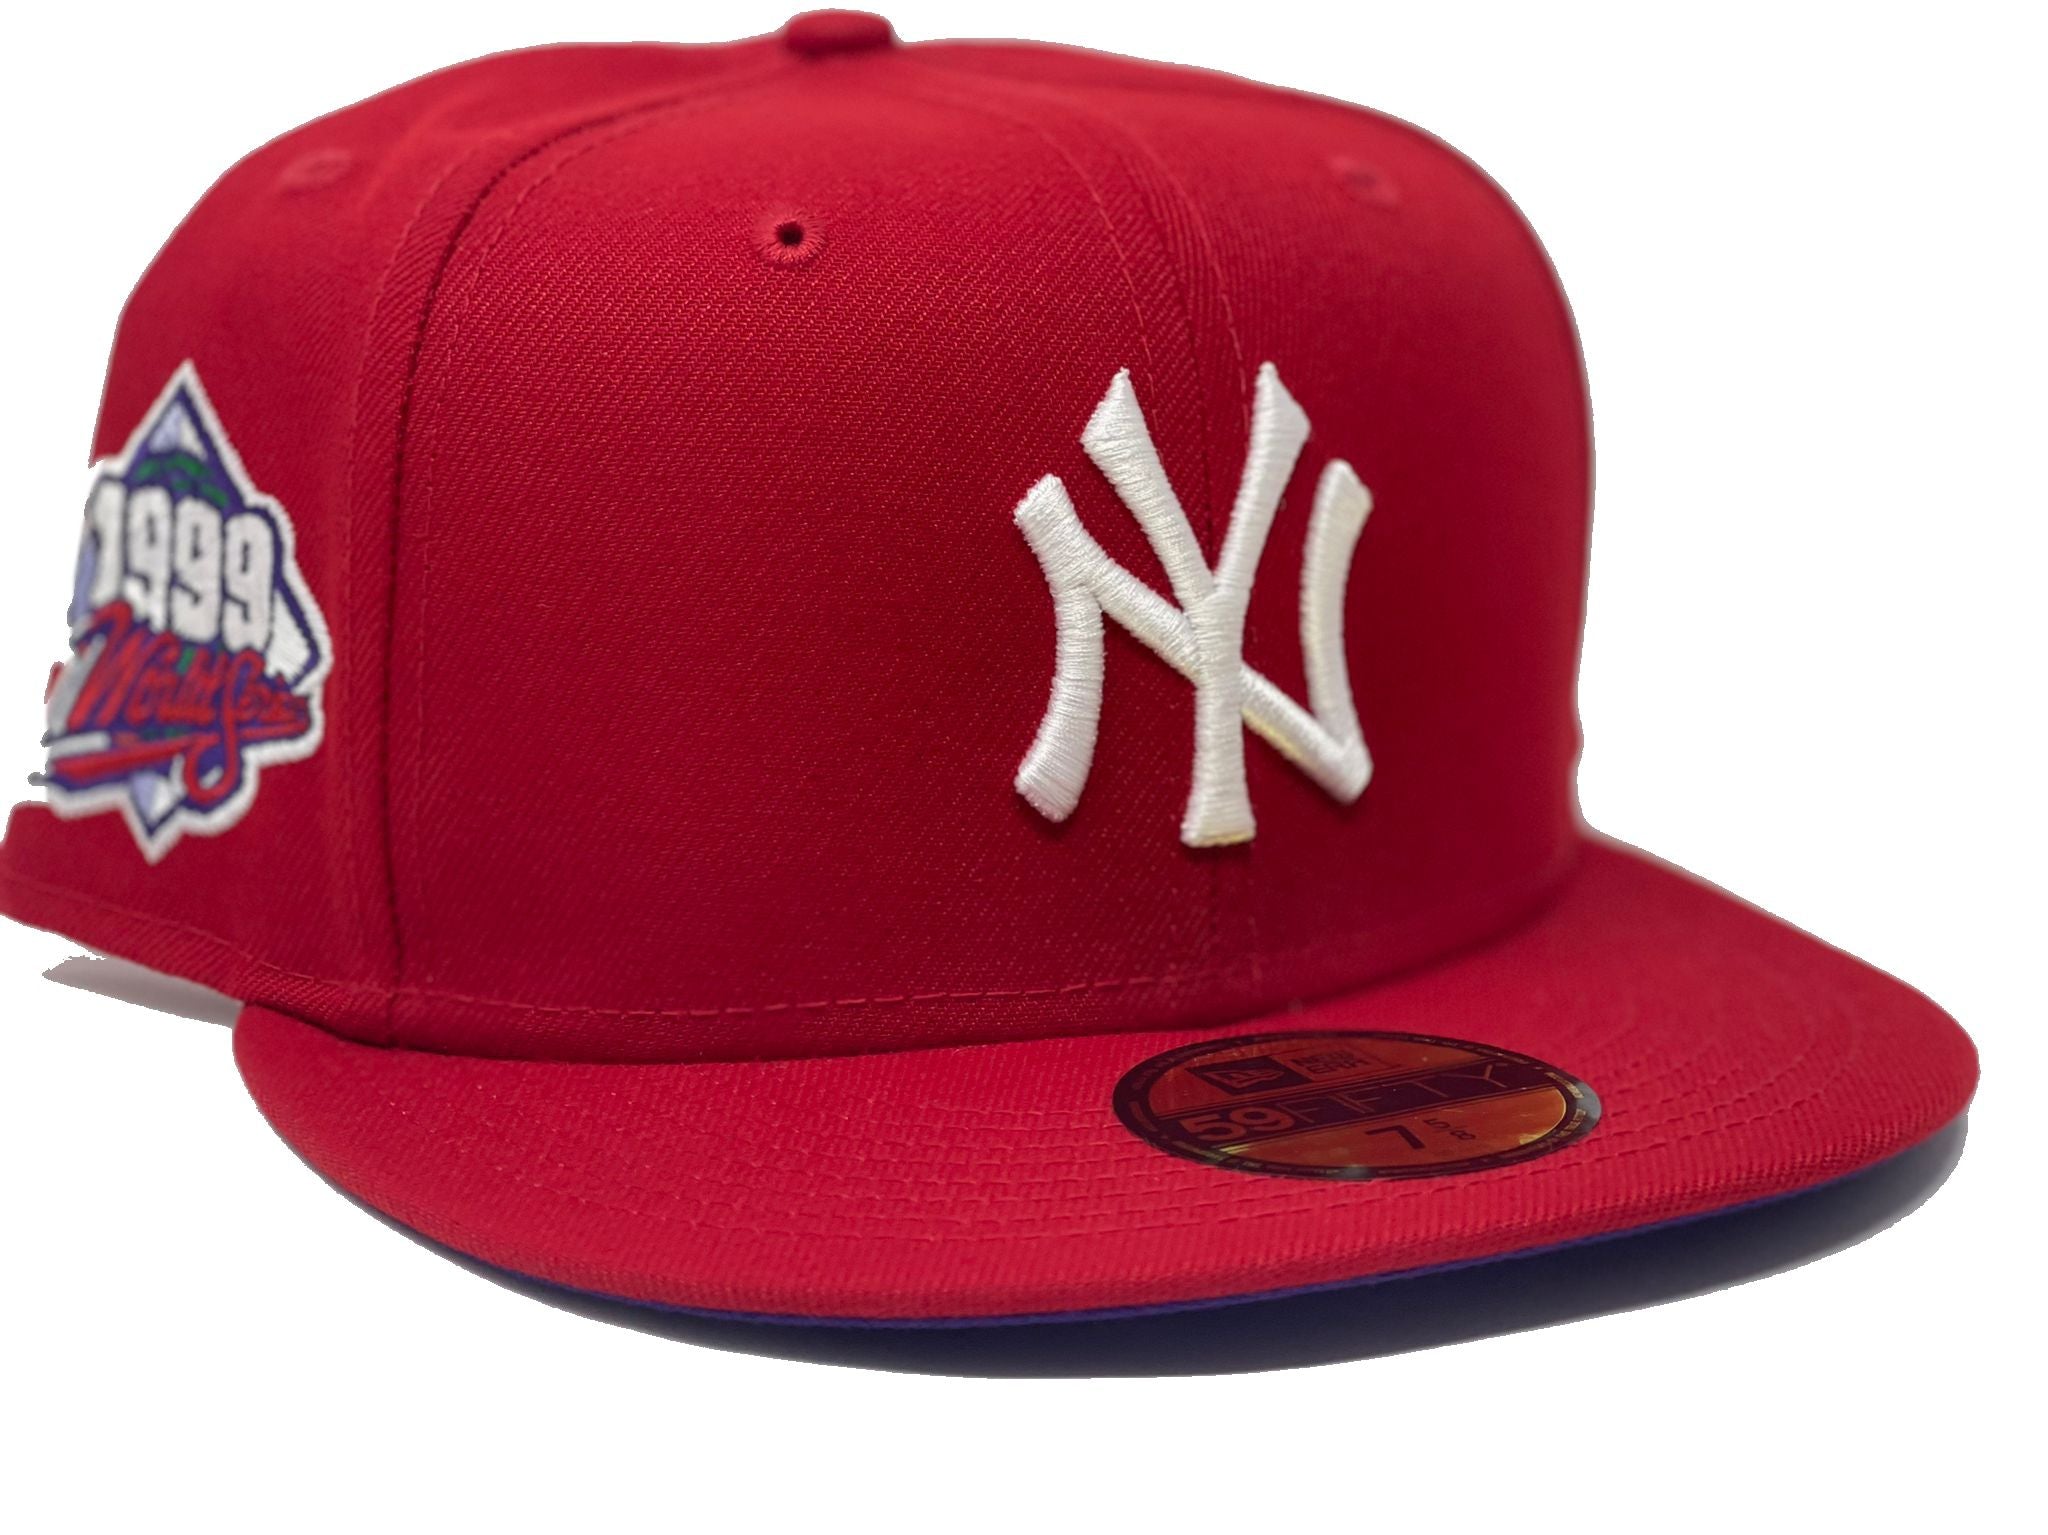 New York Yankees New Era Sidepatch 59FIFTY Fitted Hat - Red